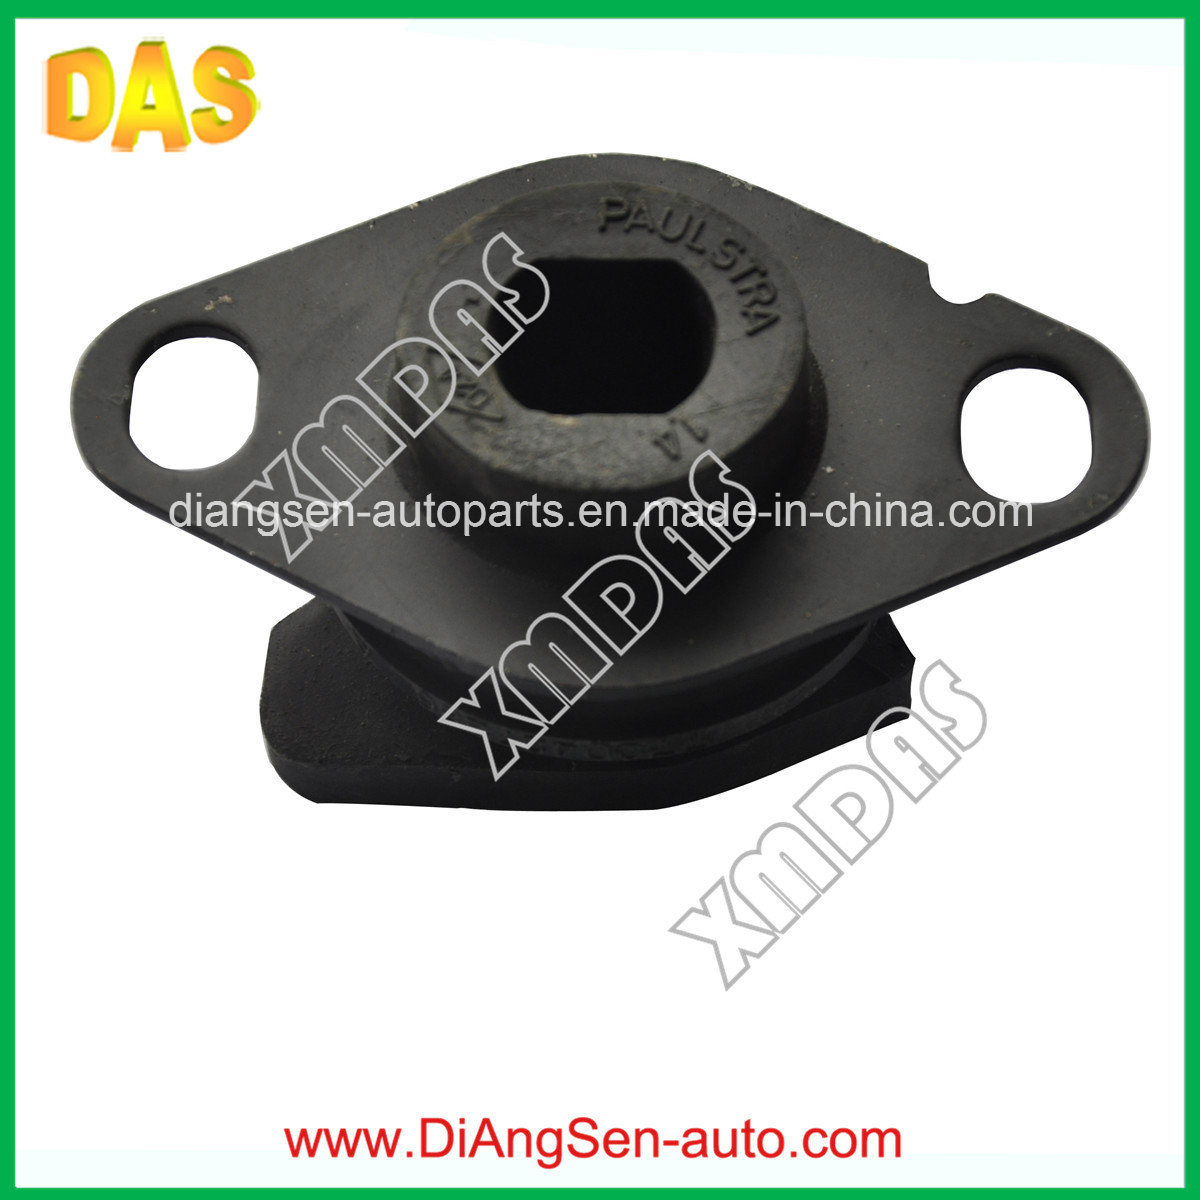 Megane Engine Motor Mounting for Rubber Parts (7700427286)